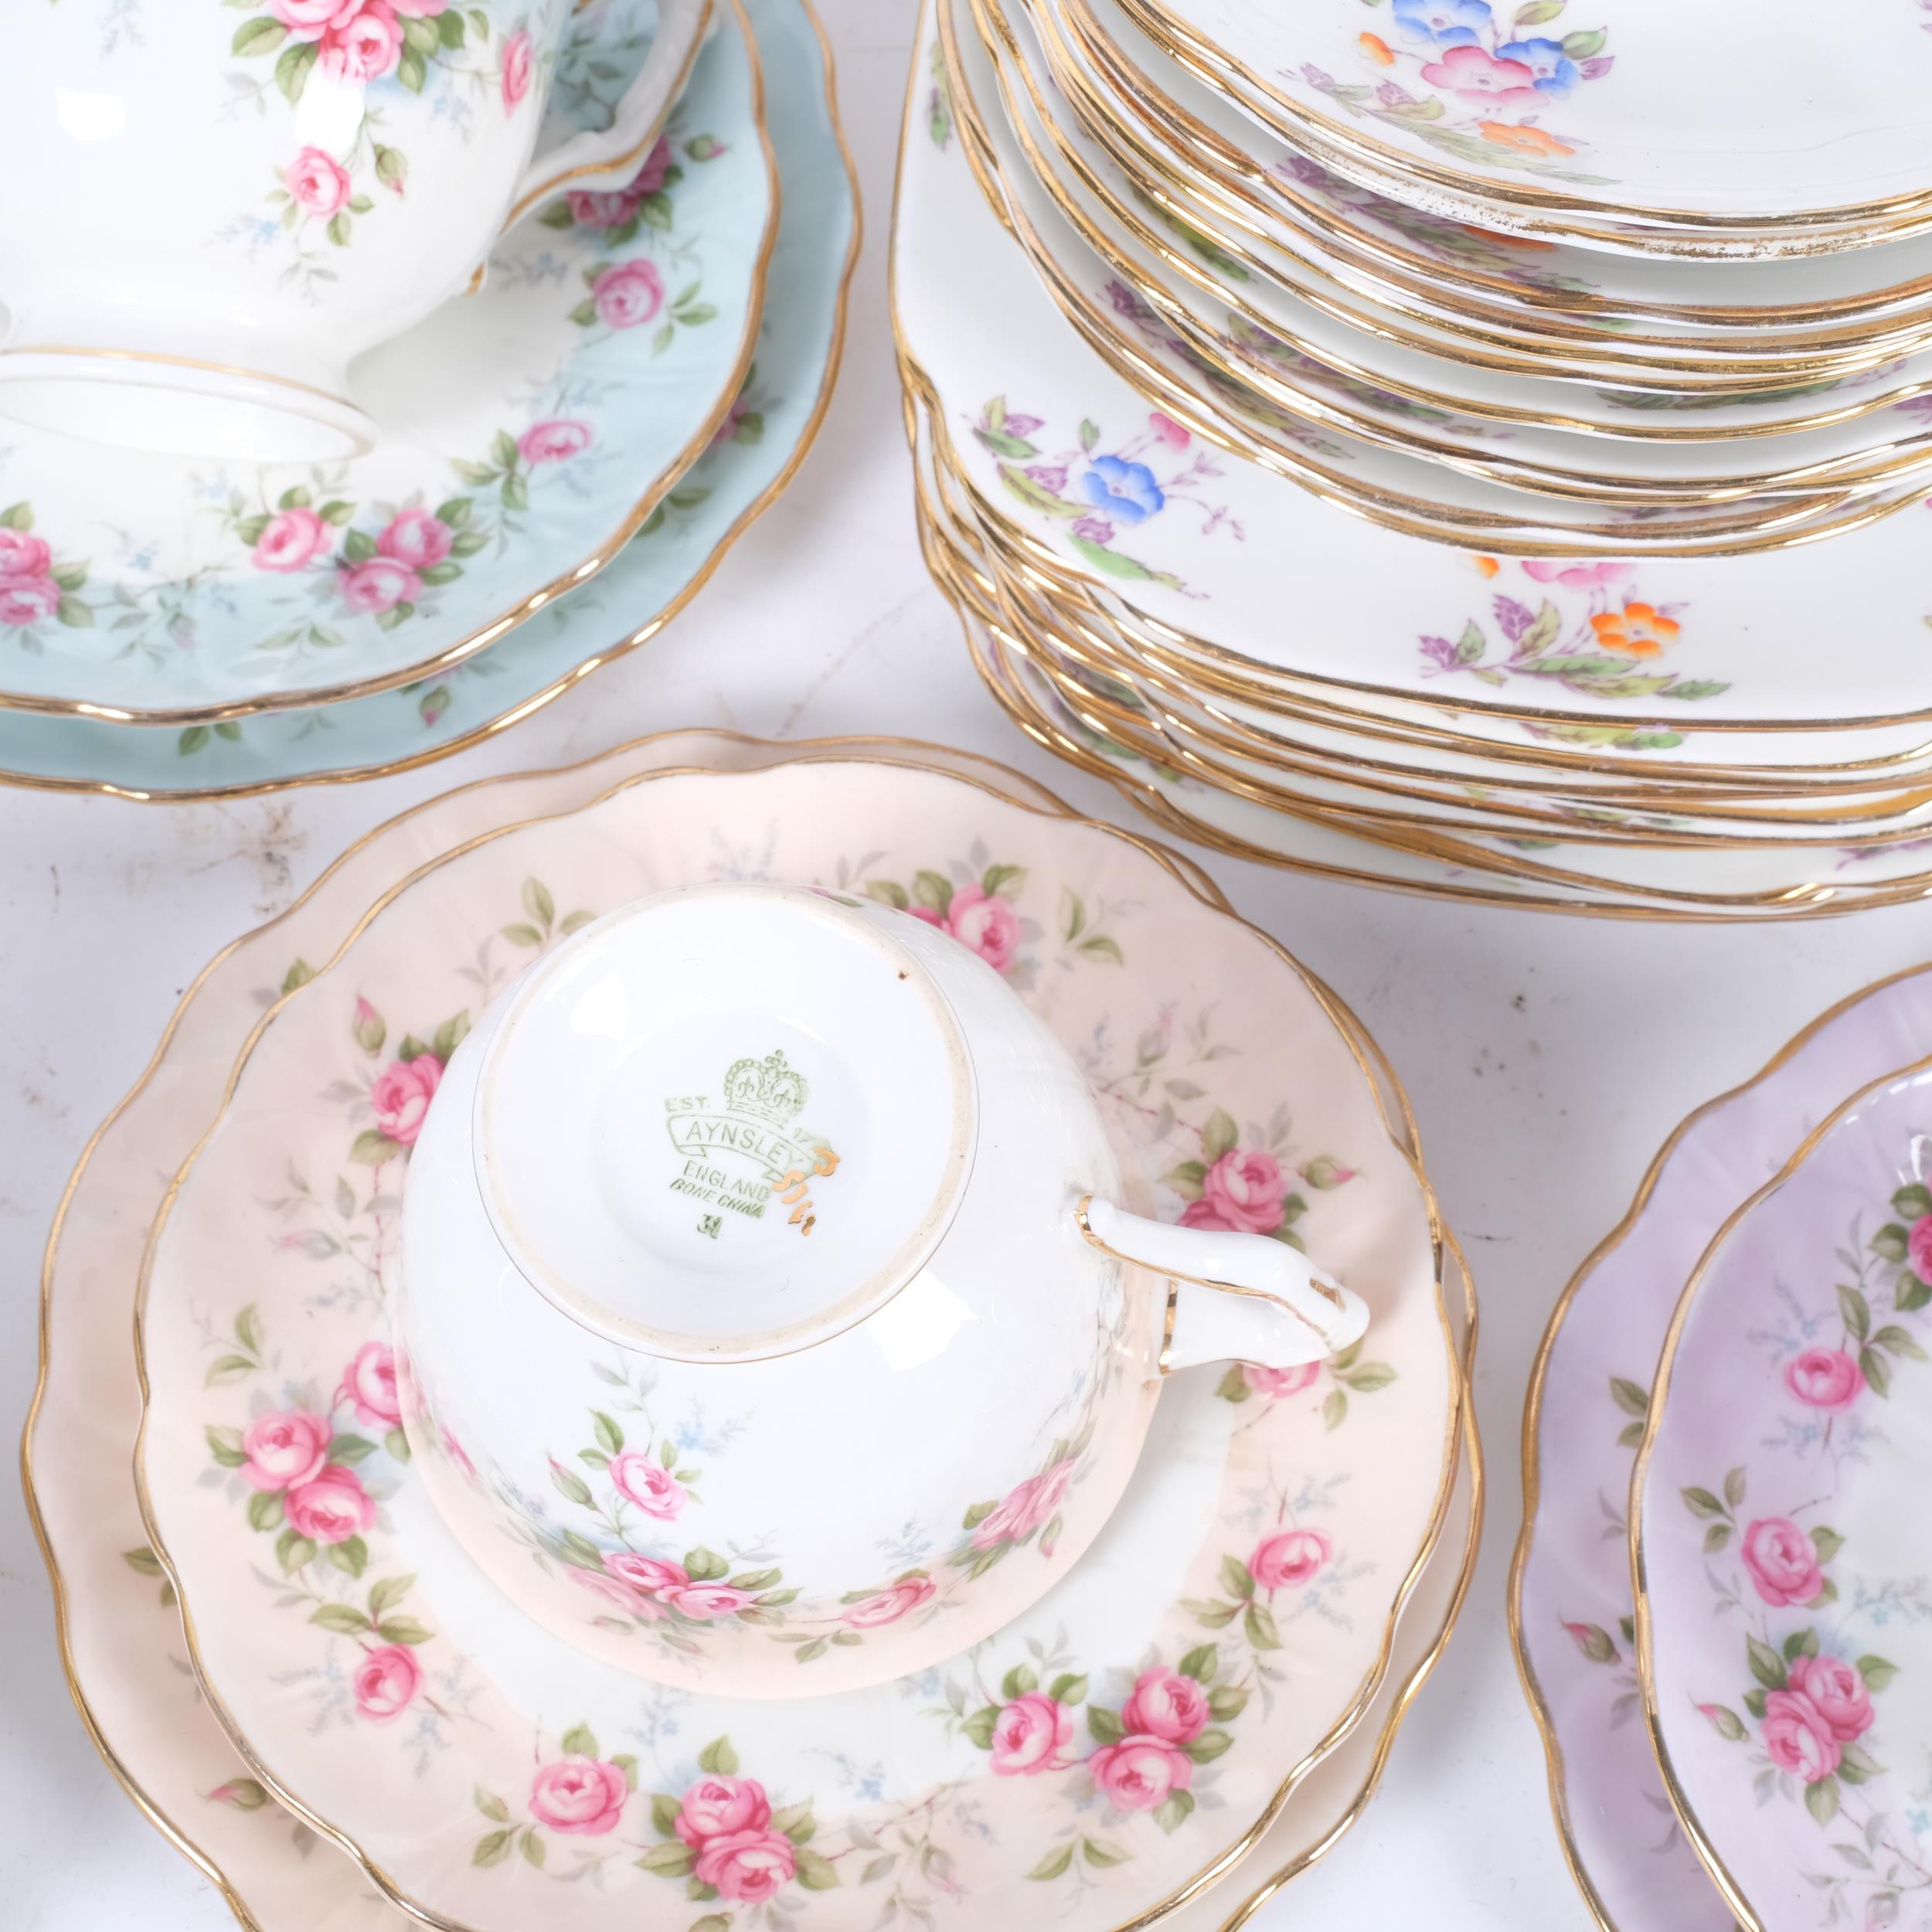 5 Aynsley cups saucers and plates with rosebud decoration, and Royal Albert floral decorated teaware - Image 2 of 2